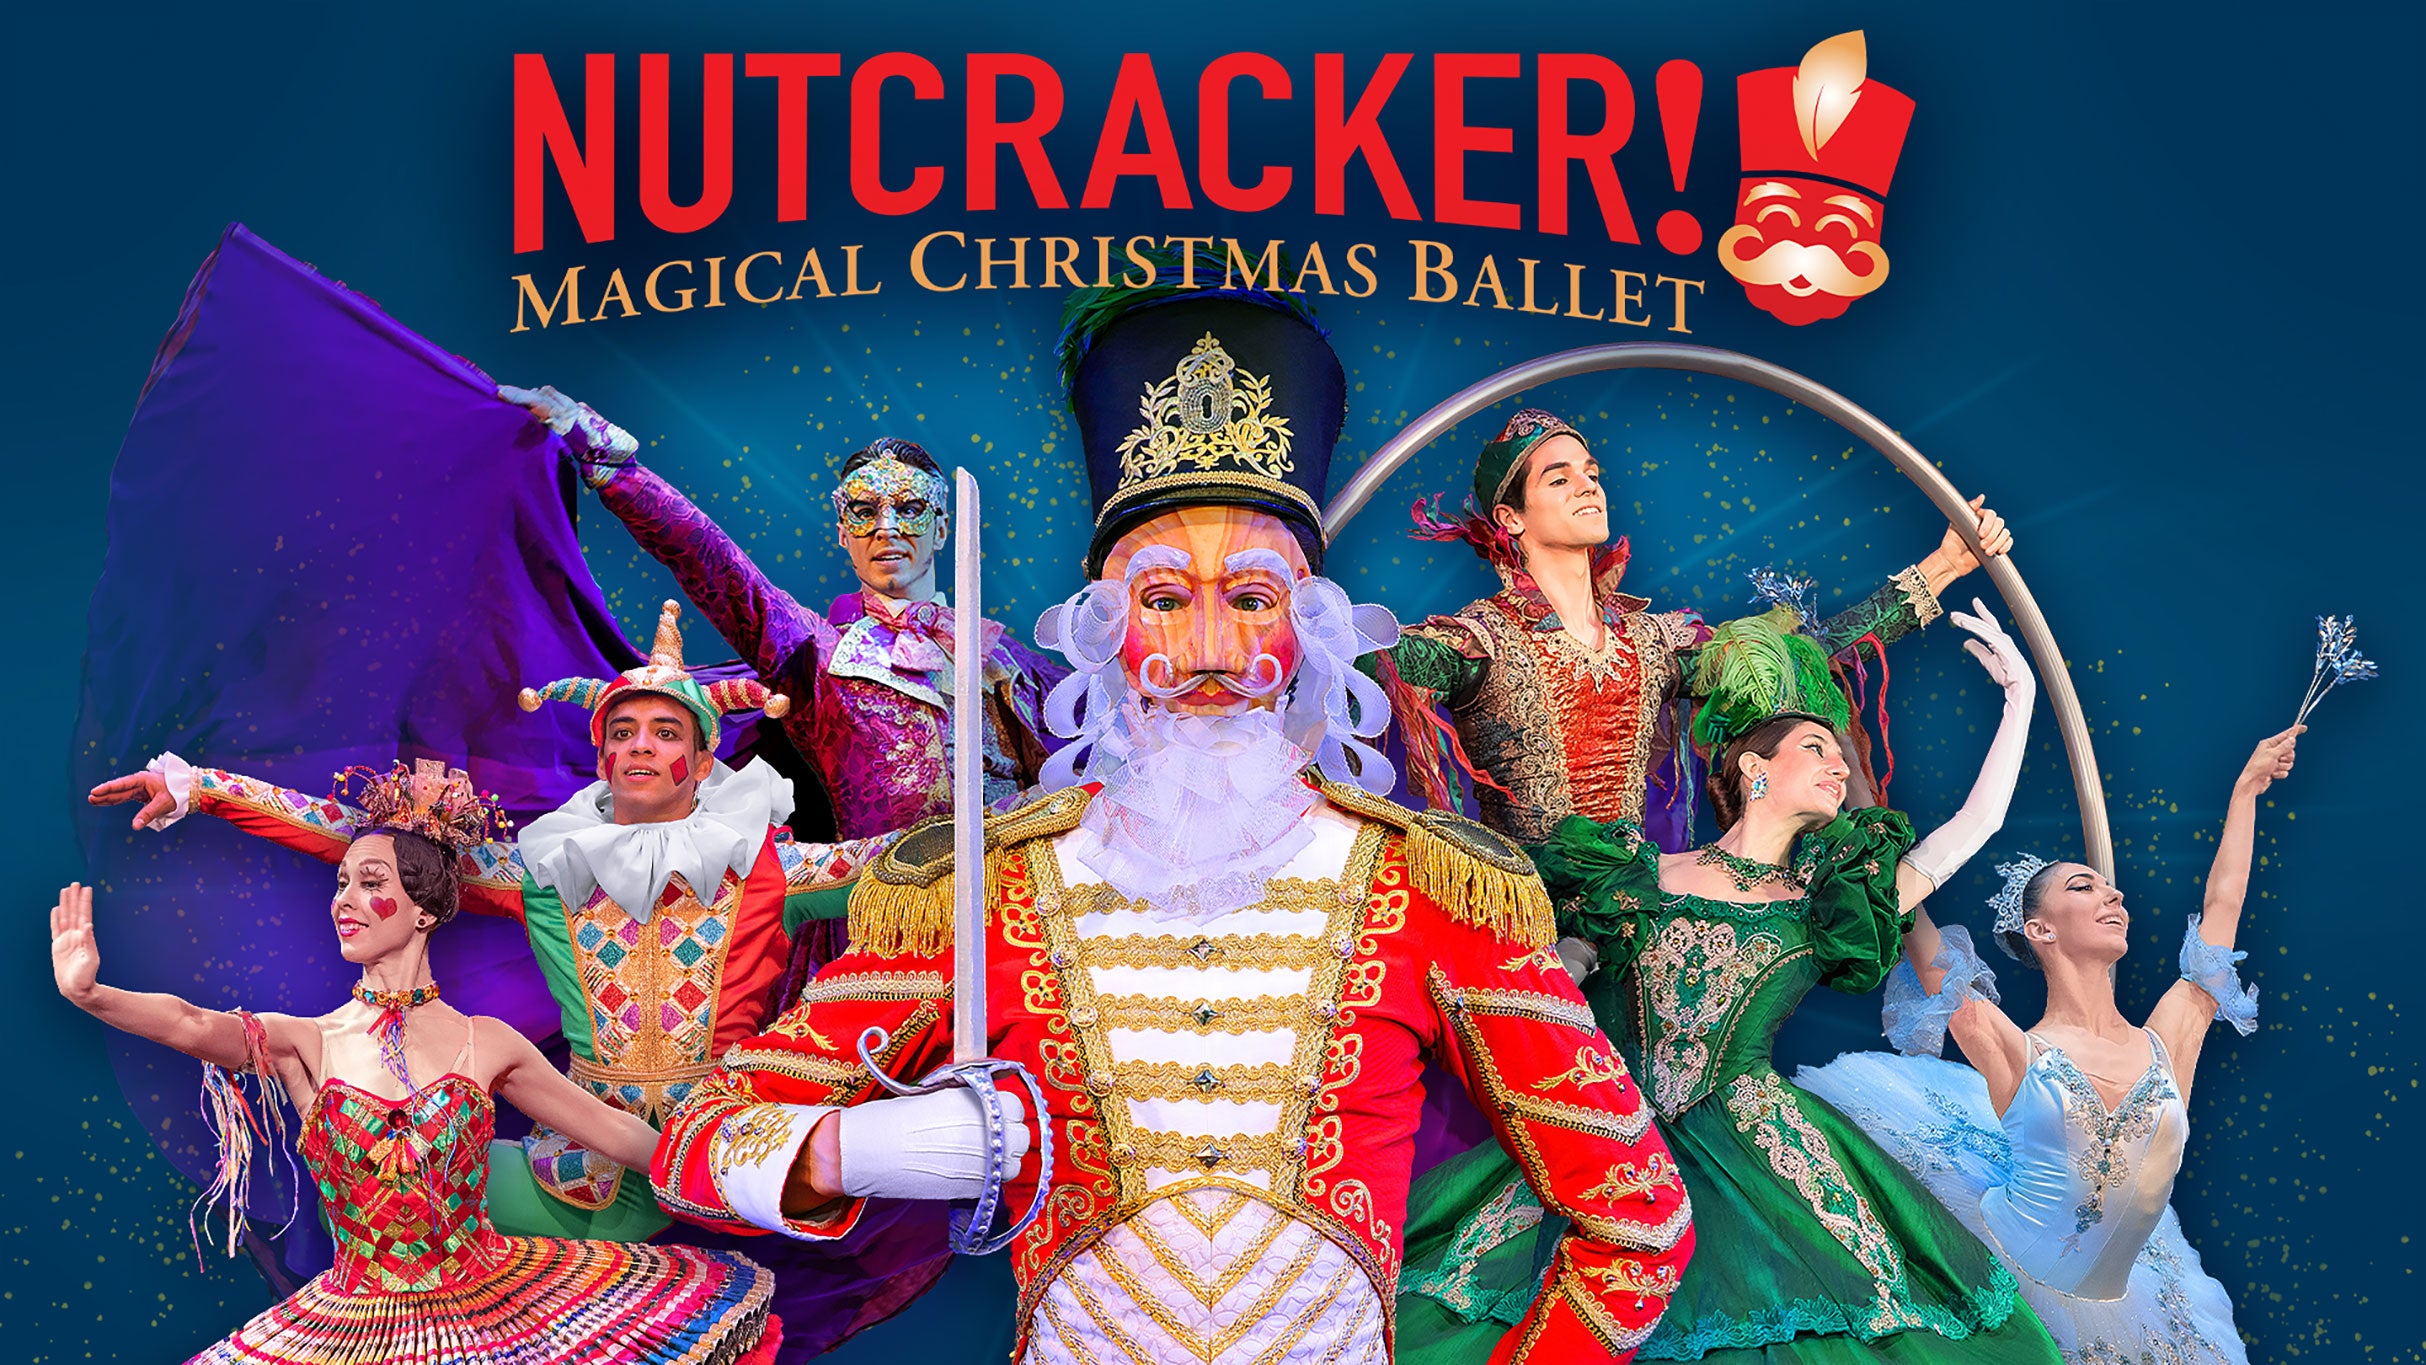 new presale password for NUTCRACKER! Magical Christmas Ballet advanced tickets in Cleveland